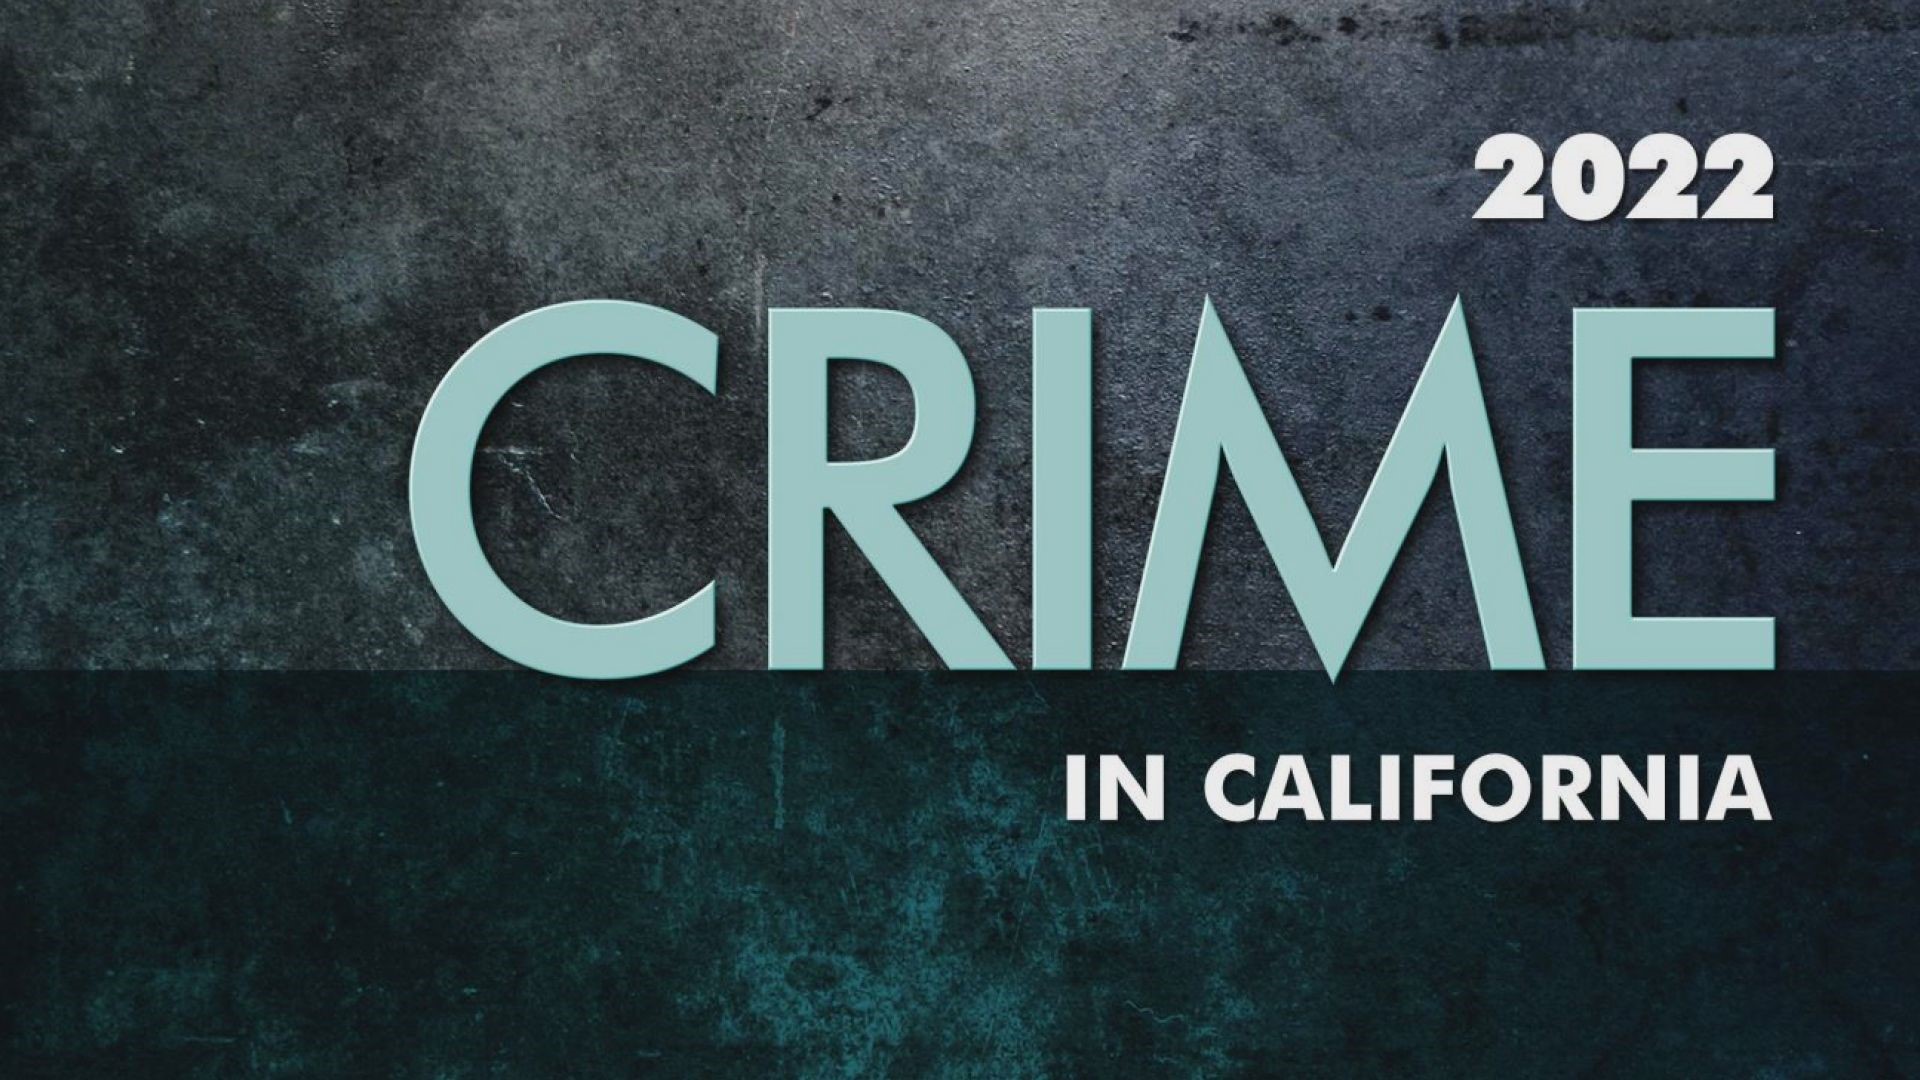 The Attorney General's annual Crime in California report shows robberies, violent crime and property crime increased from 2021 to 2022. The homicide rate dropped.